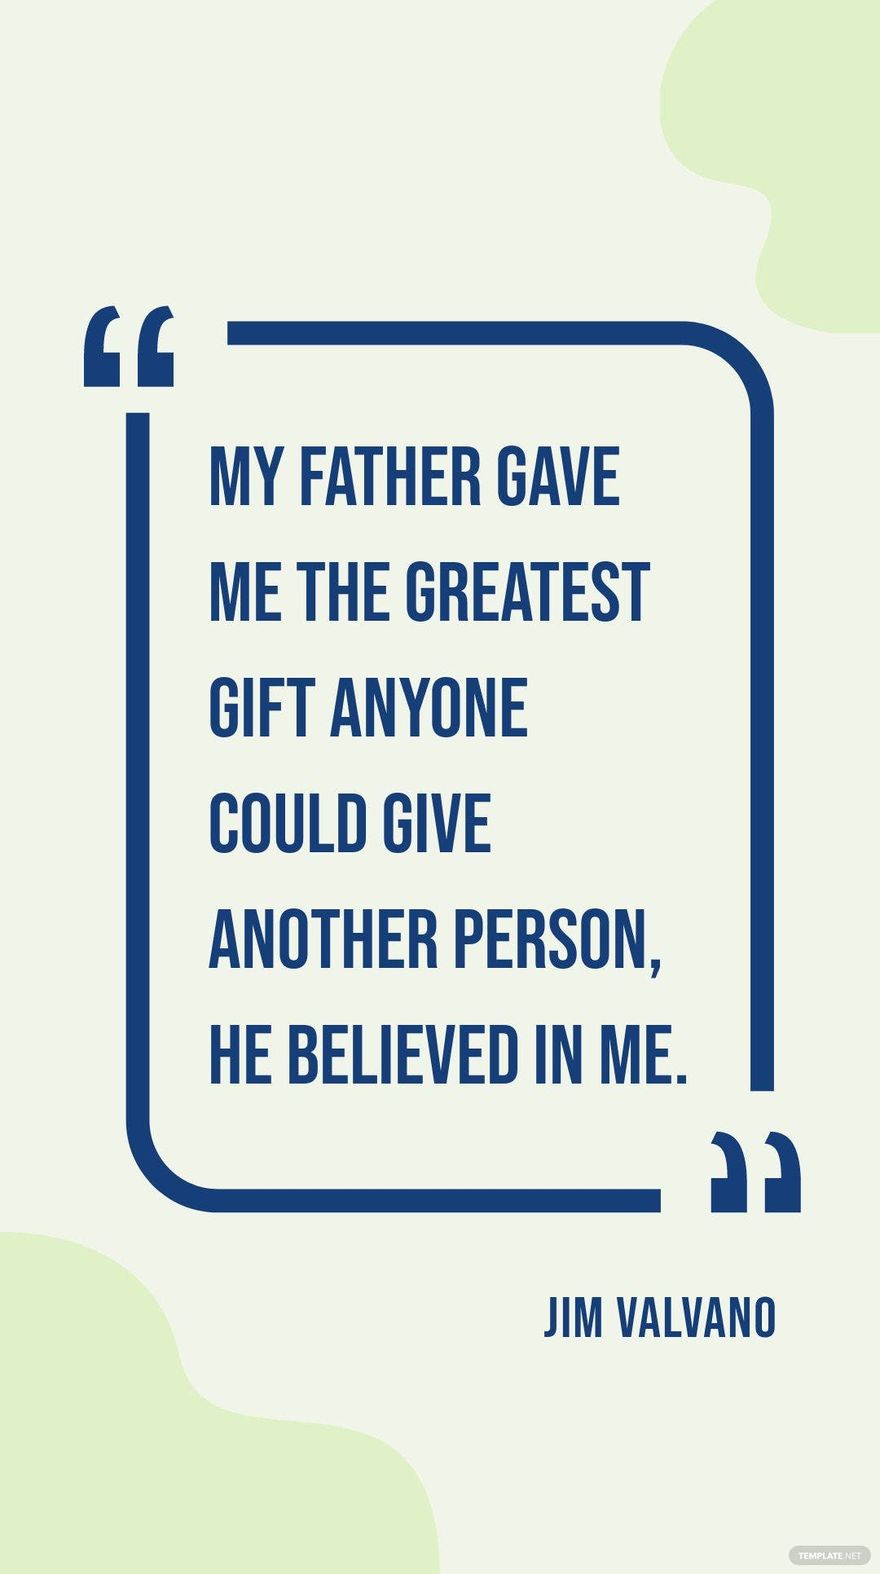 Free Jim Valvano - My father gave me the greatest gift anyone could give another person, he believed in me.